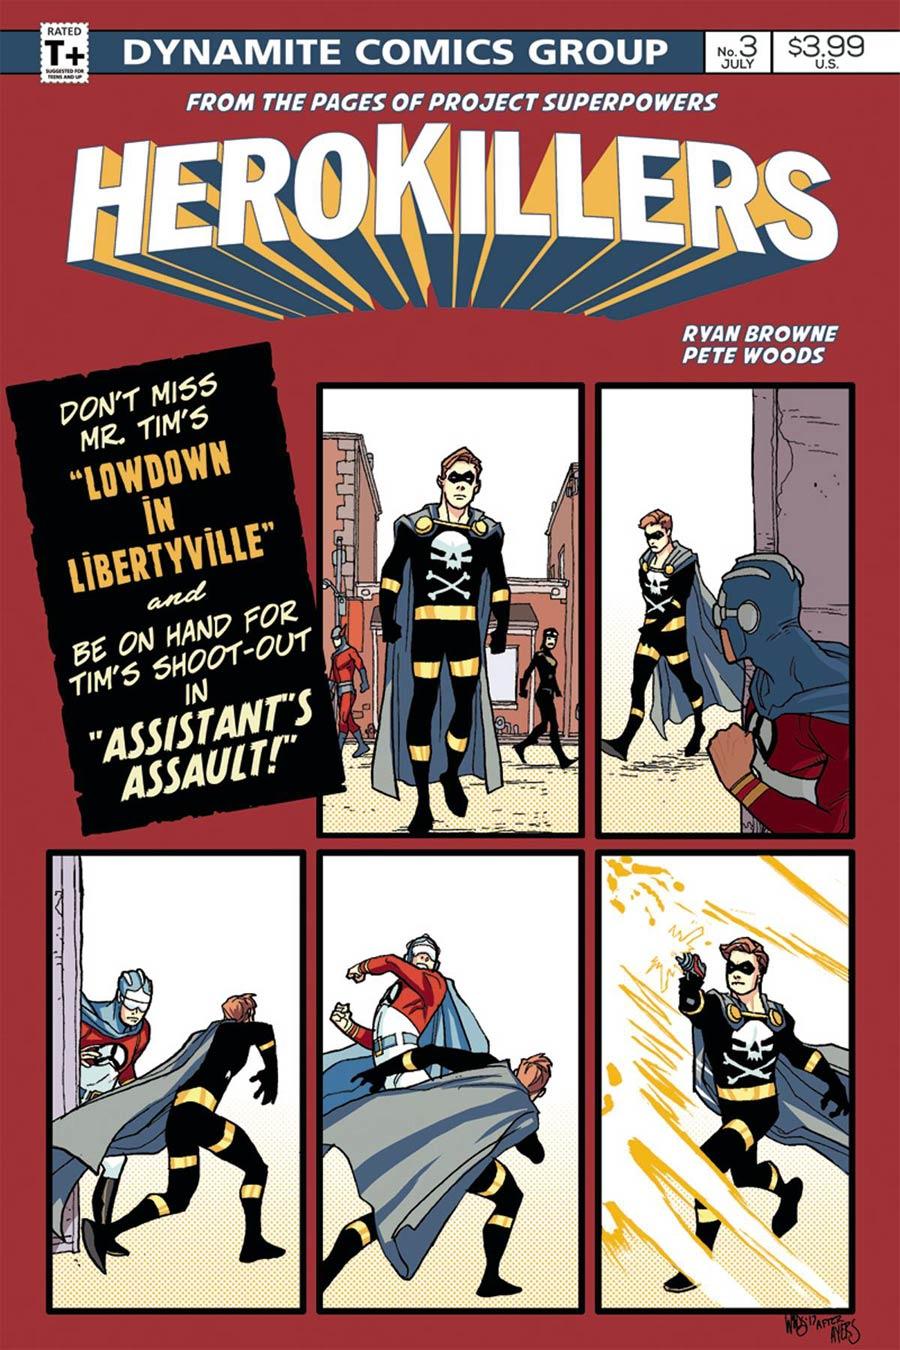 Project Superpowers Hero Killers Vol. 1 #3